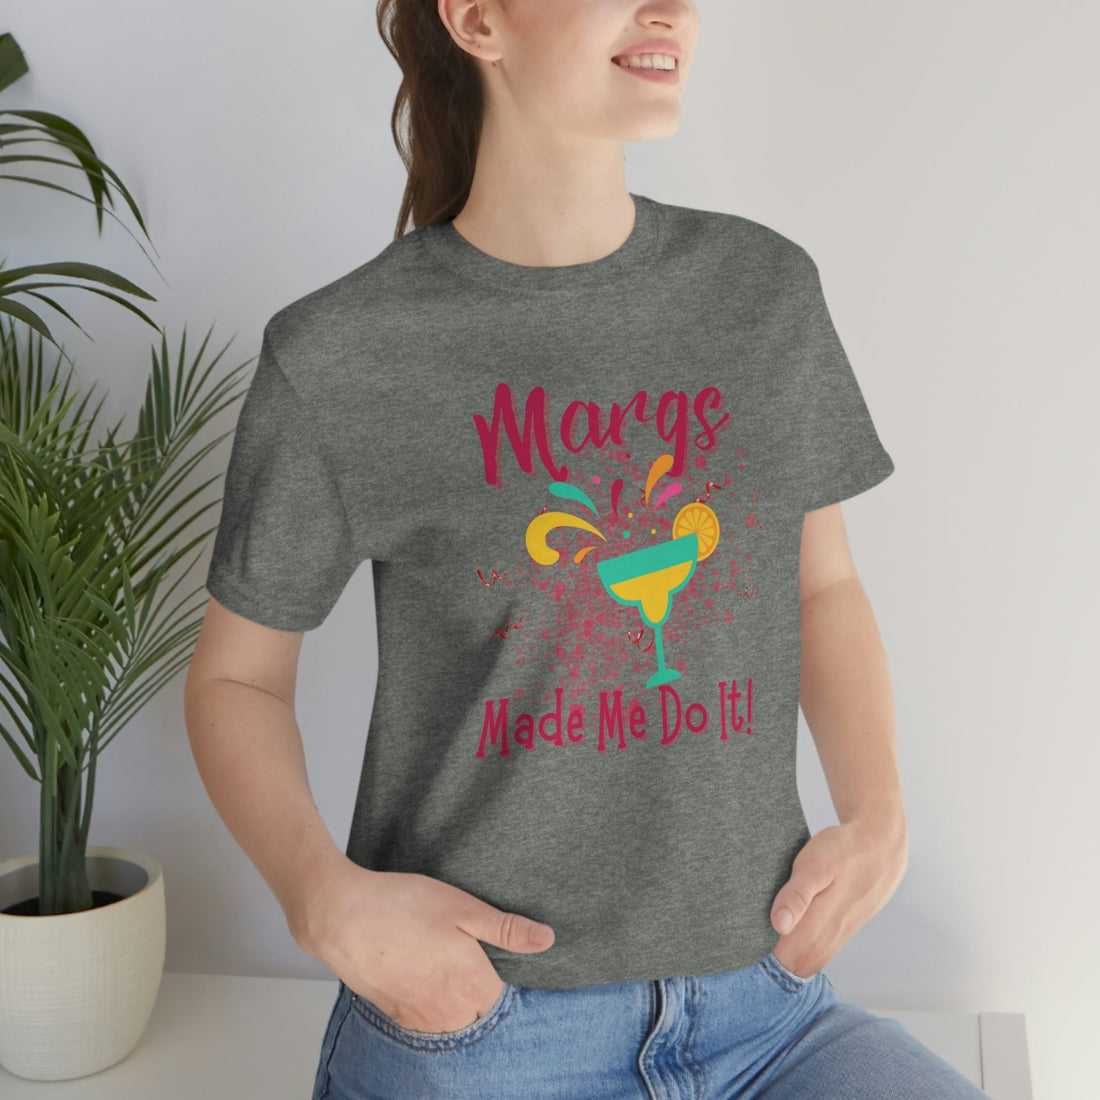 Margs Made Me Do It - T-Shirt - Positively Sassy - Margs Made Me Do It